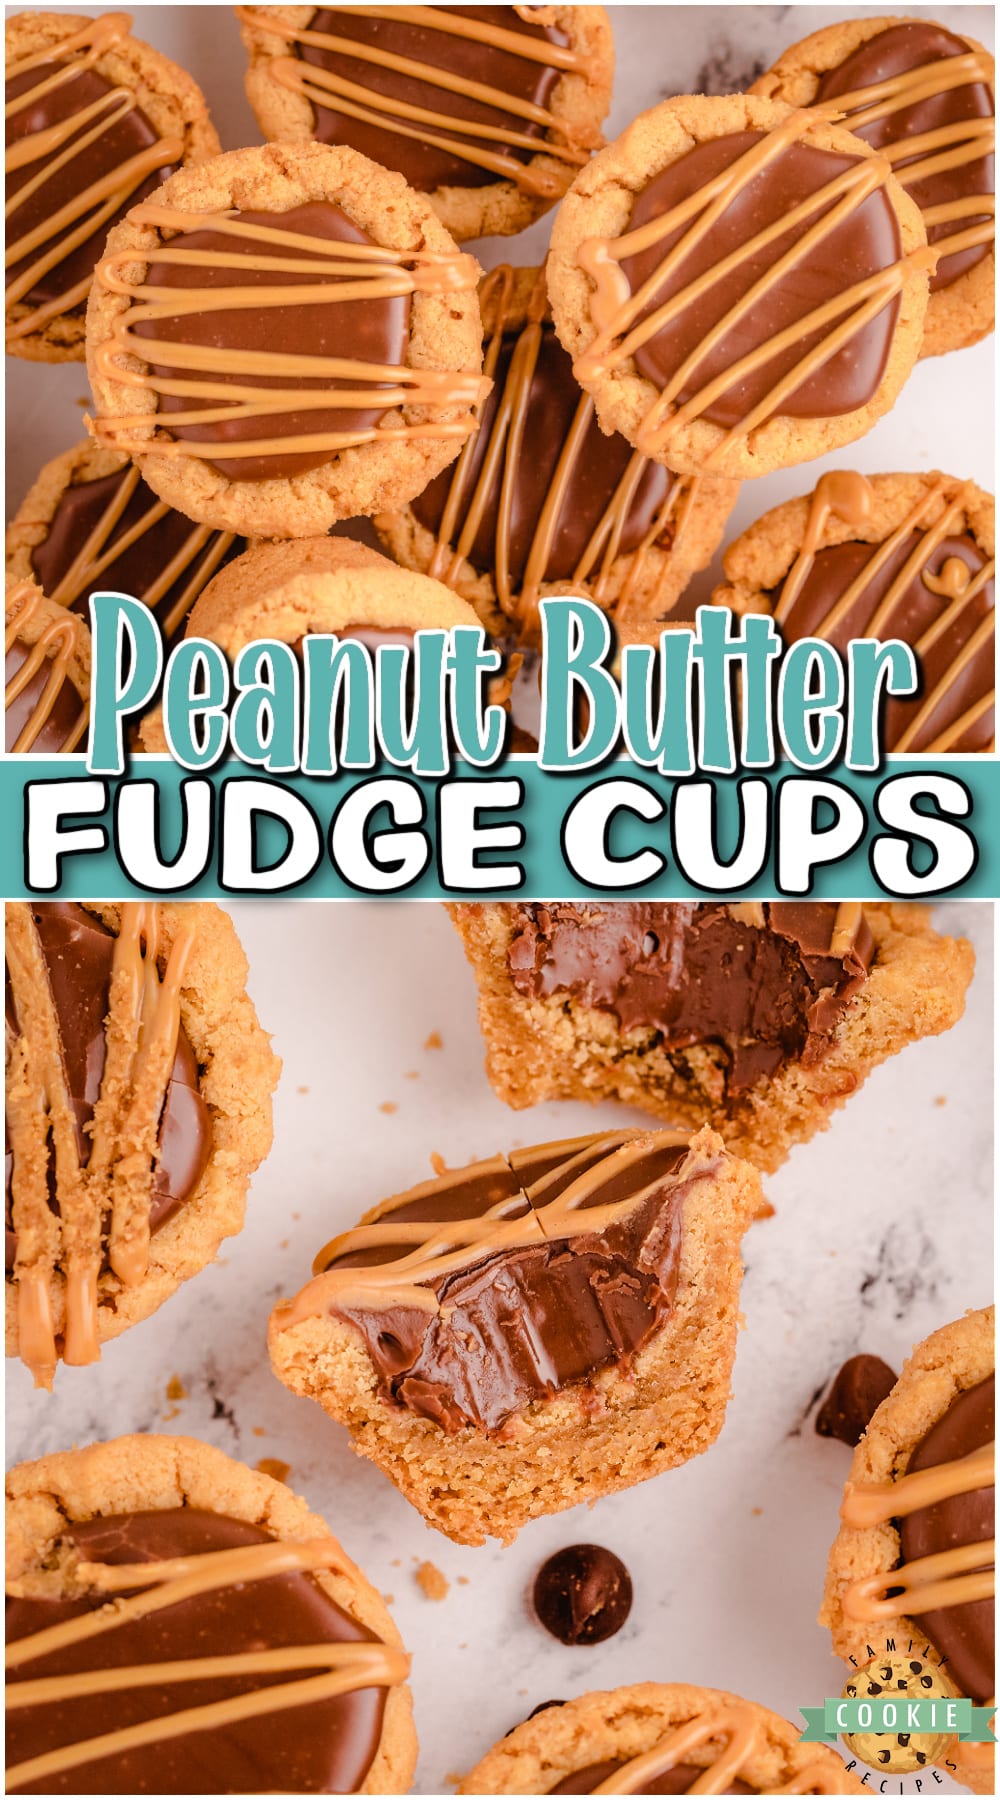 Fudge Peanut Butter Cookie Cups are peanut butter cookies baked in a mini muffin pan & filled with a simple chocolate fudge! Delicious flavor combination in these amazing fudge cookies.